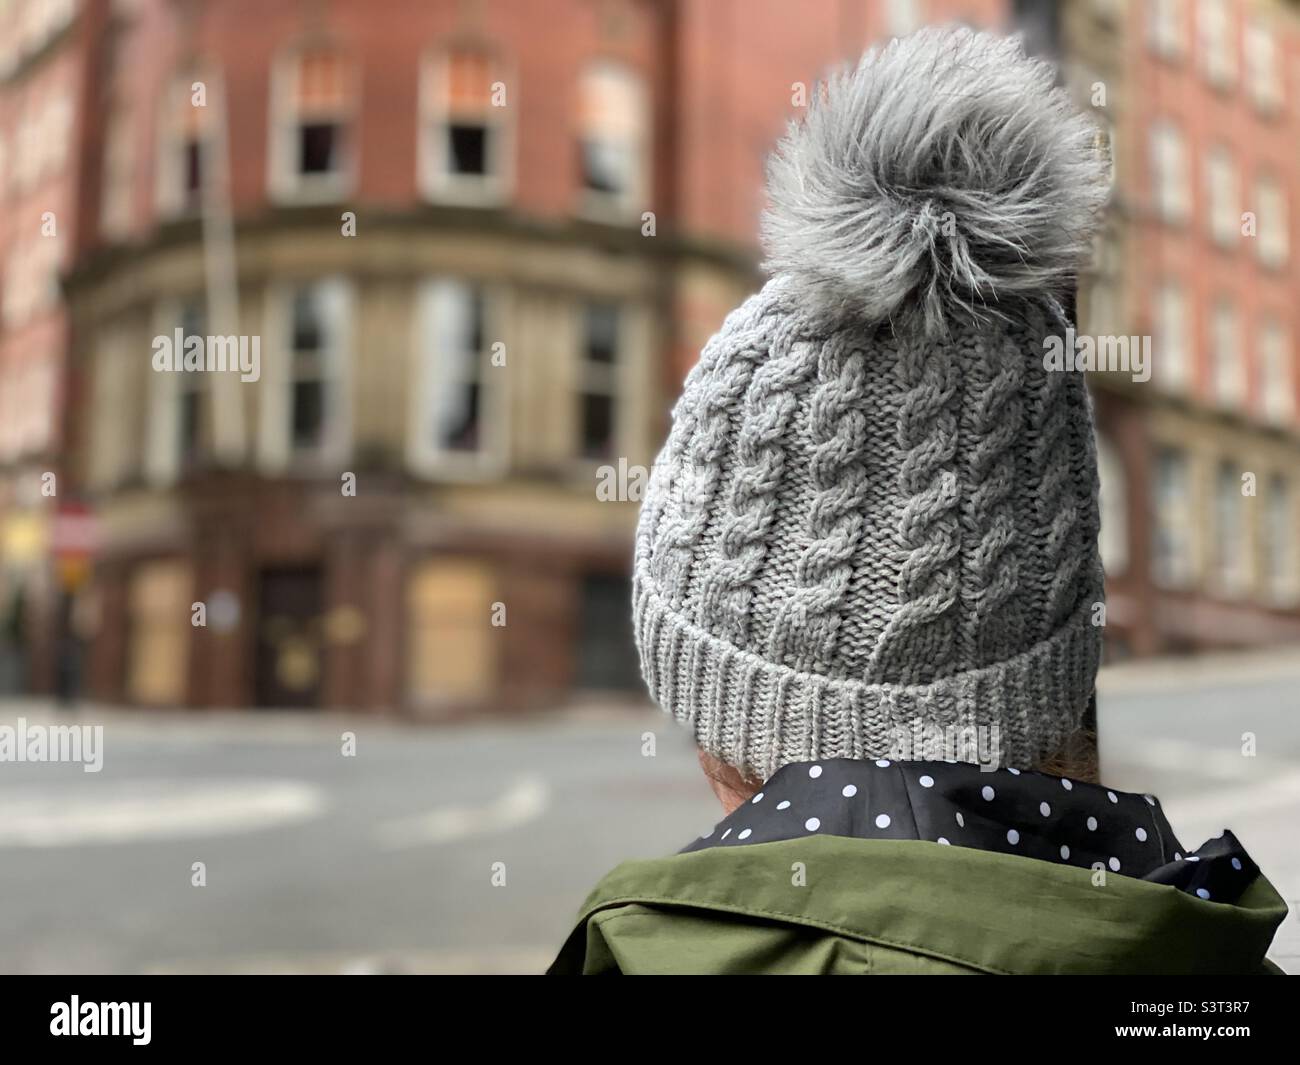 Rear view of woman wearing a knit hat amidst buildings Stock Photo